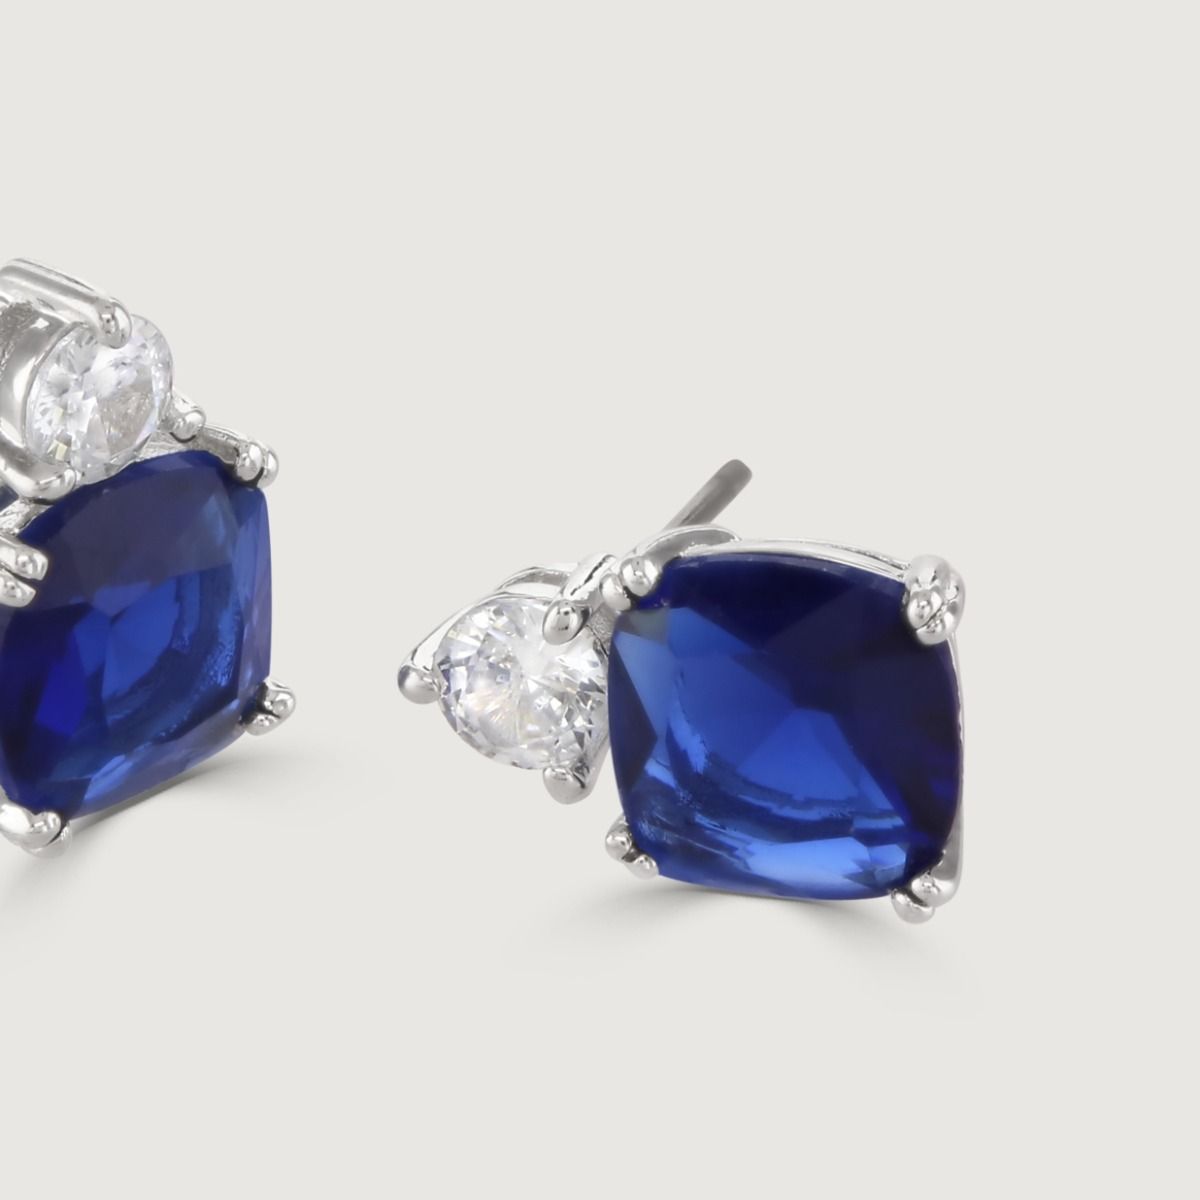 These show stopping stud earrings are set with a flawless brilliant cut cubic zirconia above a striking cushion cut Sapphire coloured stone. Wear to add timeless glamour to any look.